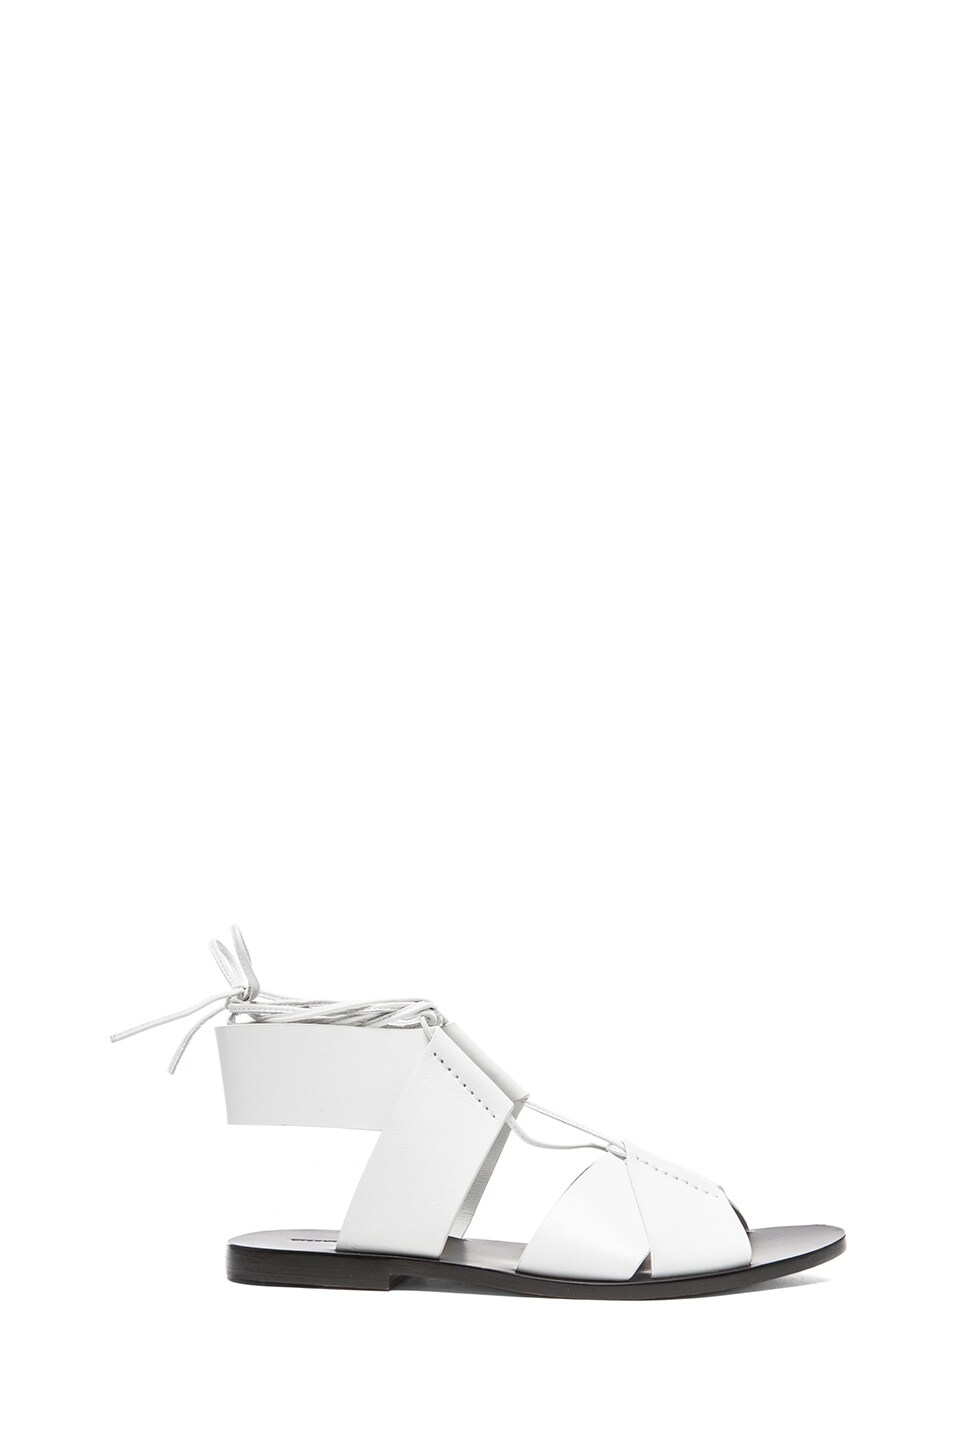 Image 1 of Alexander Wang Marlene Leather Sandals in Peroxide